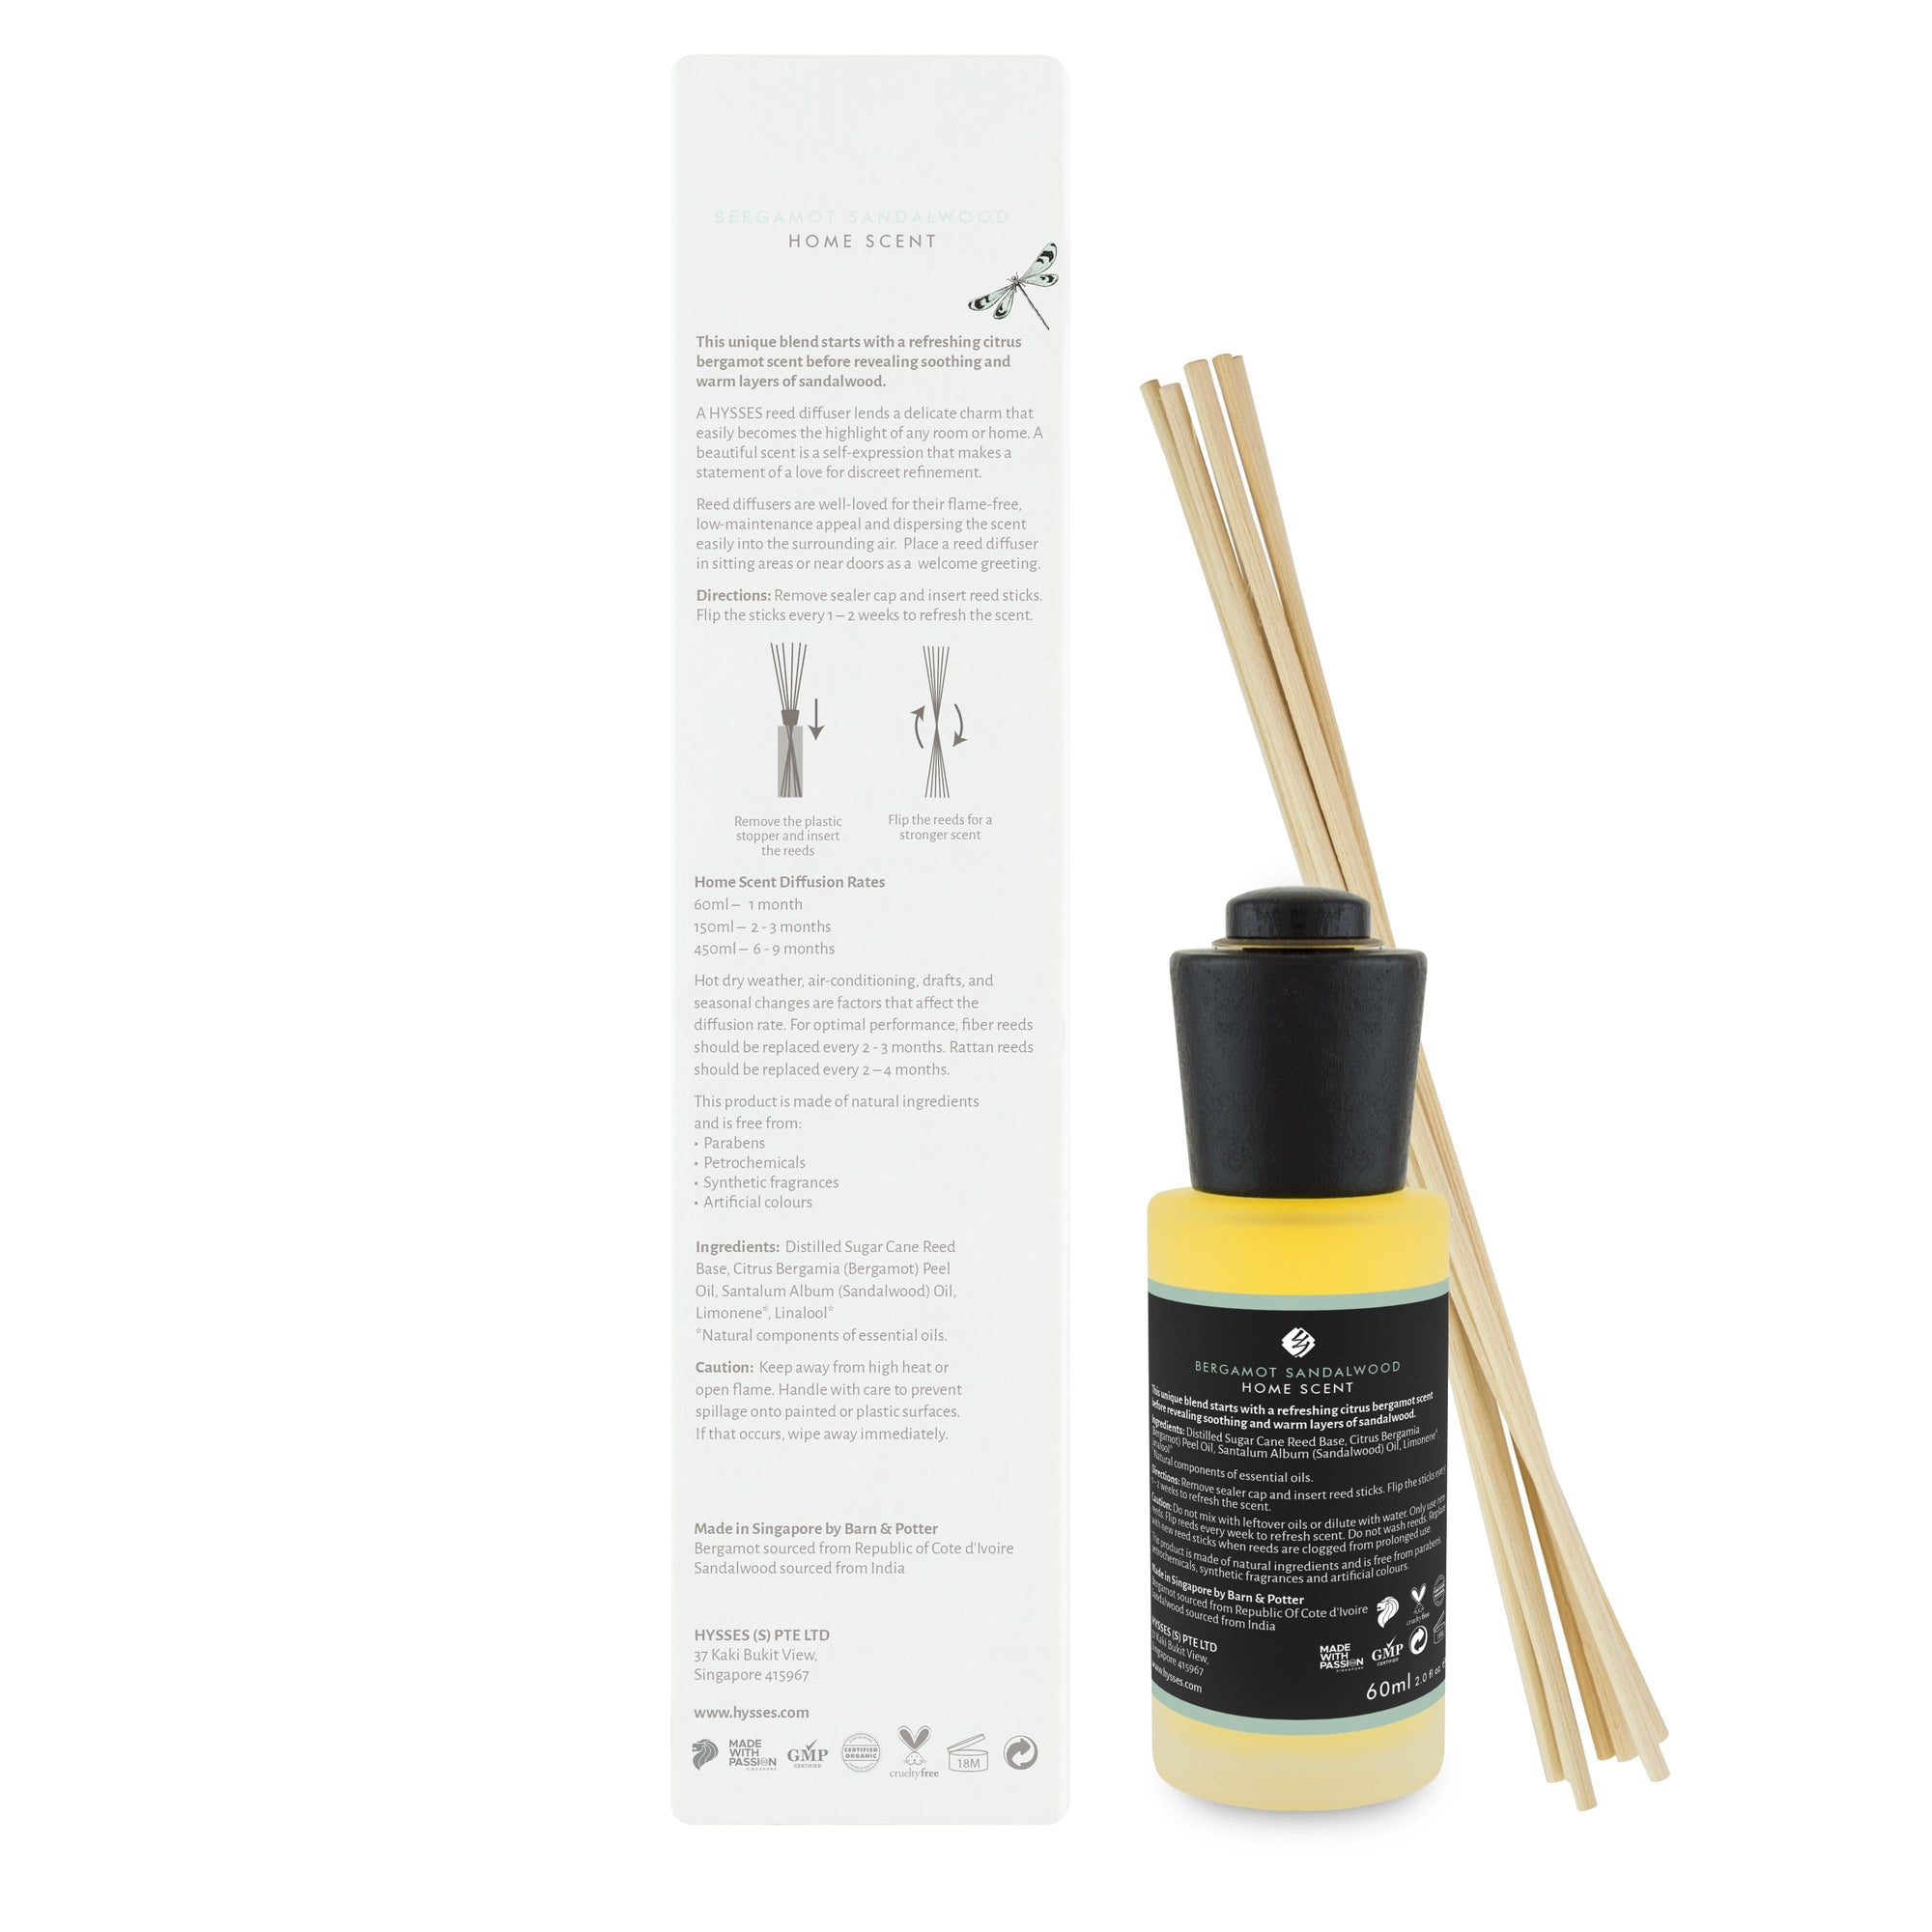 Hysses Home Scents 60ml Home Scent Reed Diffuser Bergamot Sandalwood